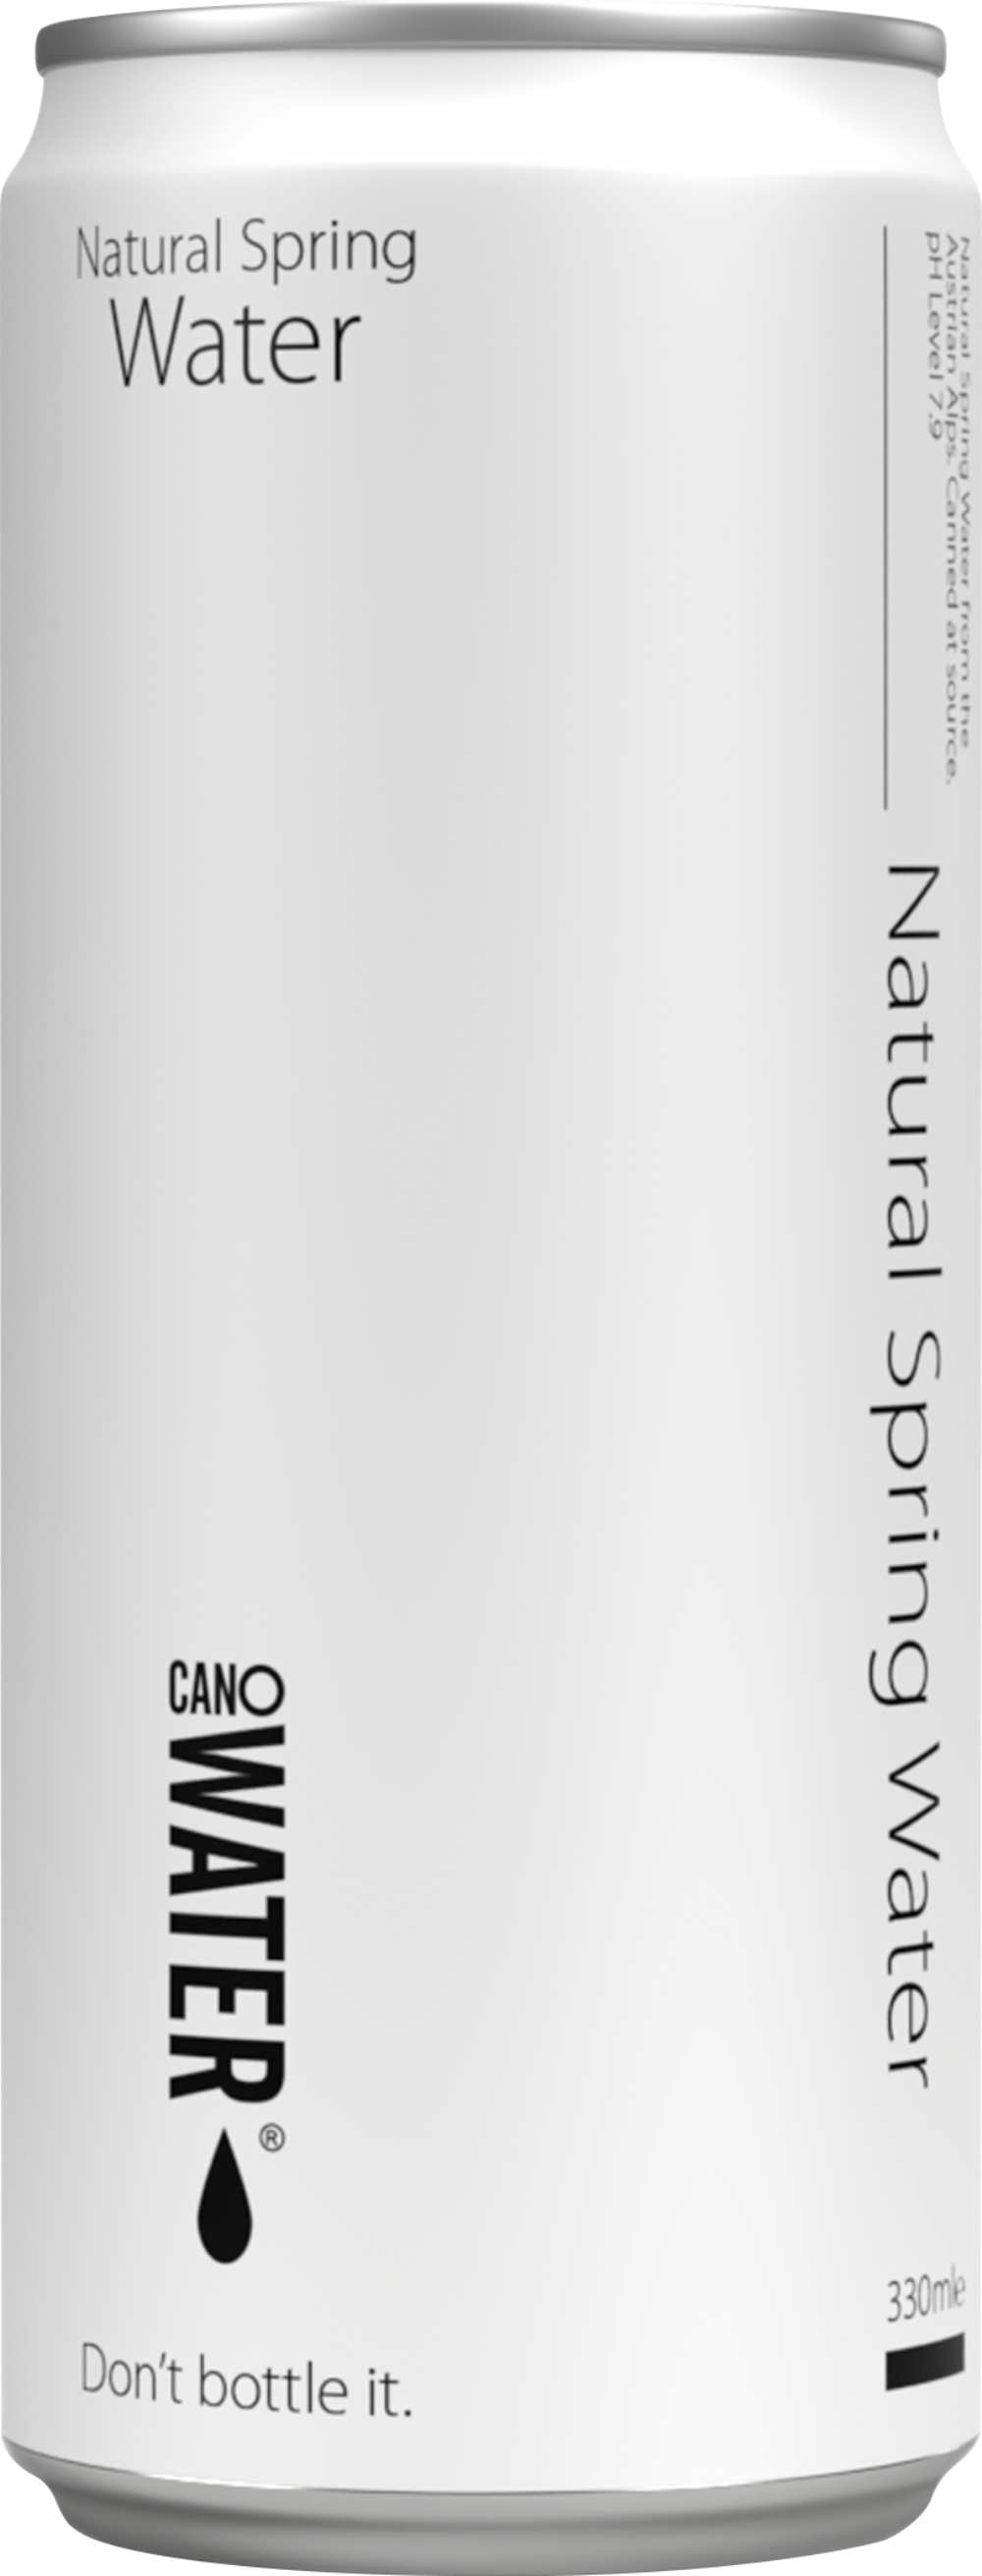 CAN O WATER Natural Spring Water - Still 330ml